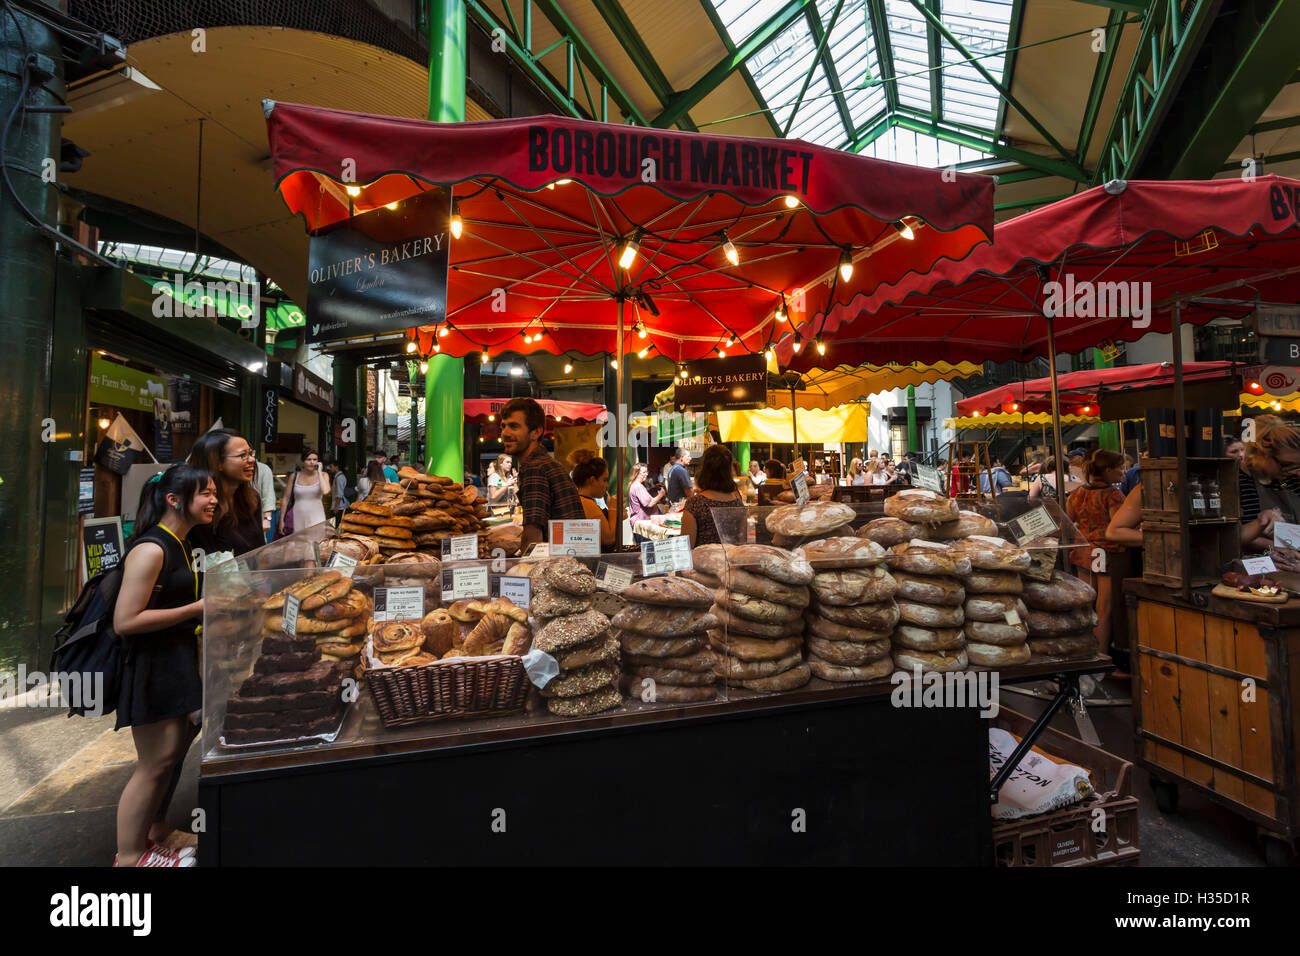 Customers at a bread stall, Borough Market, Britain's most renowned food market, Southwark, London, England, United Kingdom, Eur Stock Photo